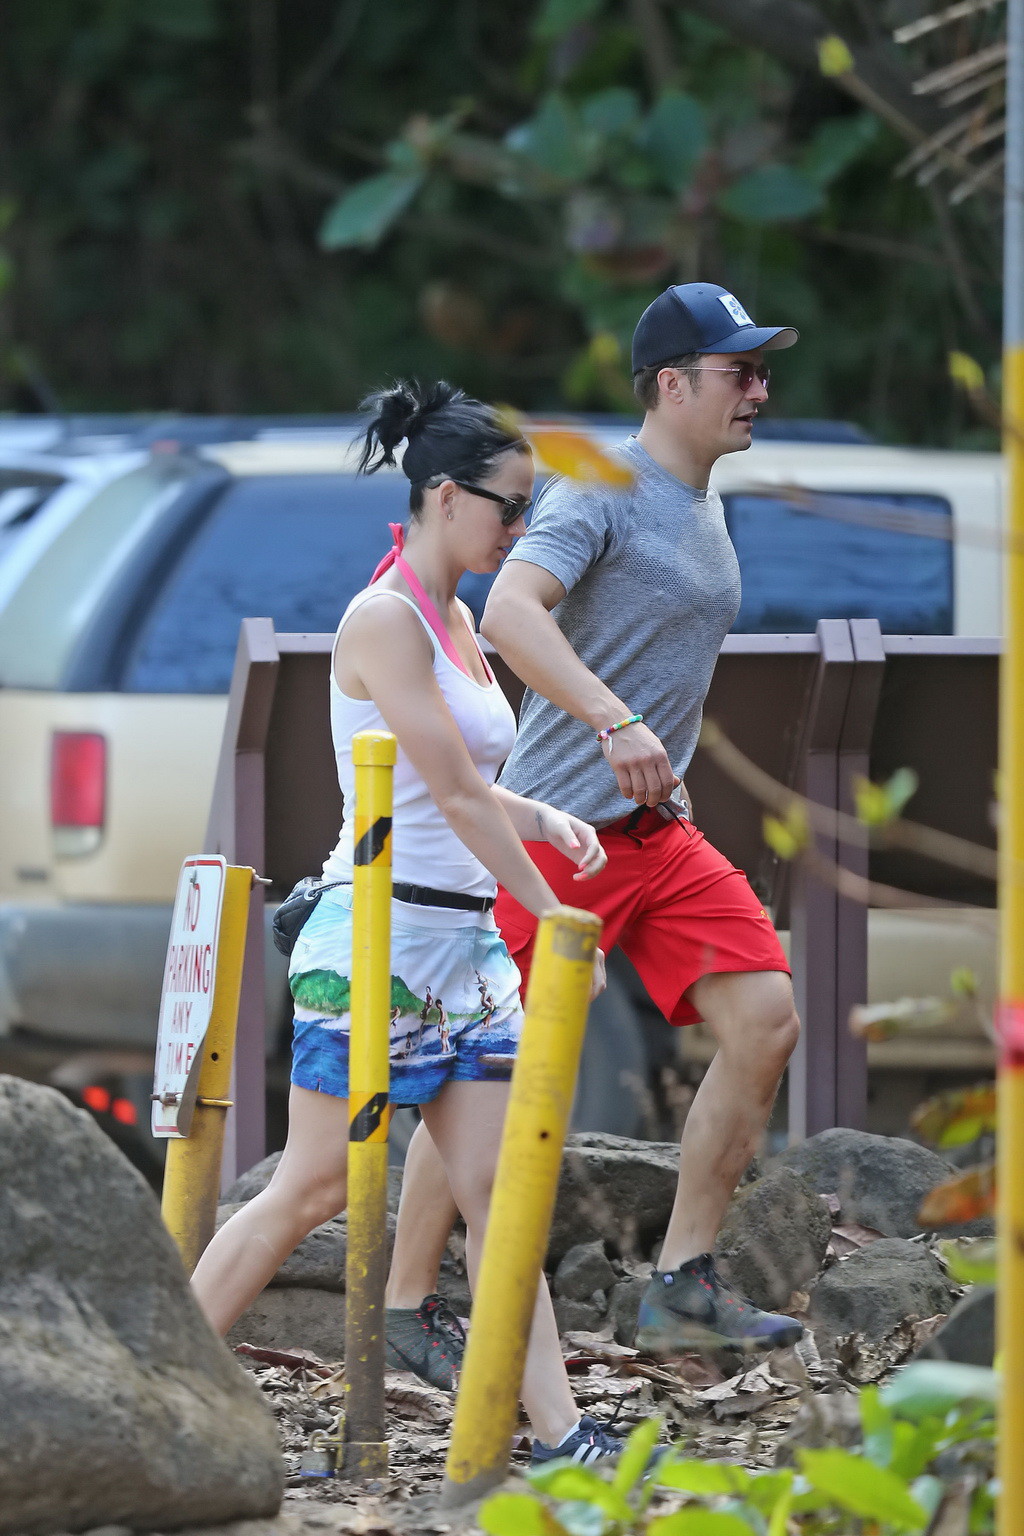 Katy Perry showing pokies in bikini top and shorts #75145412